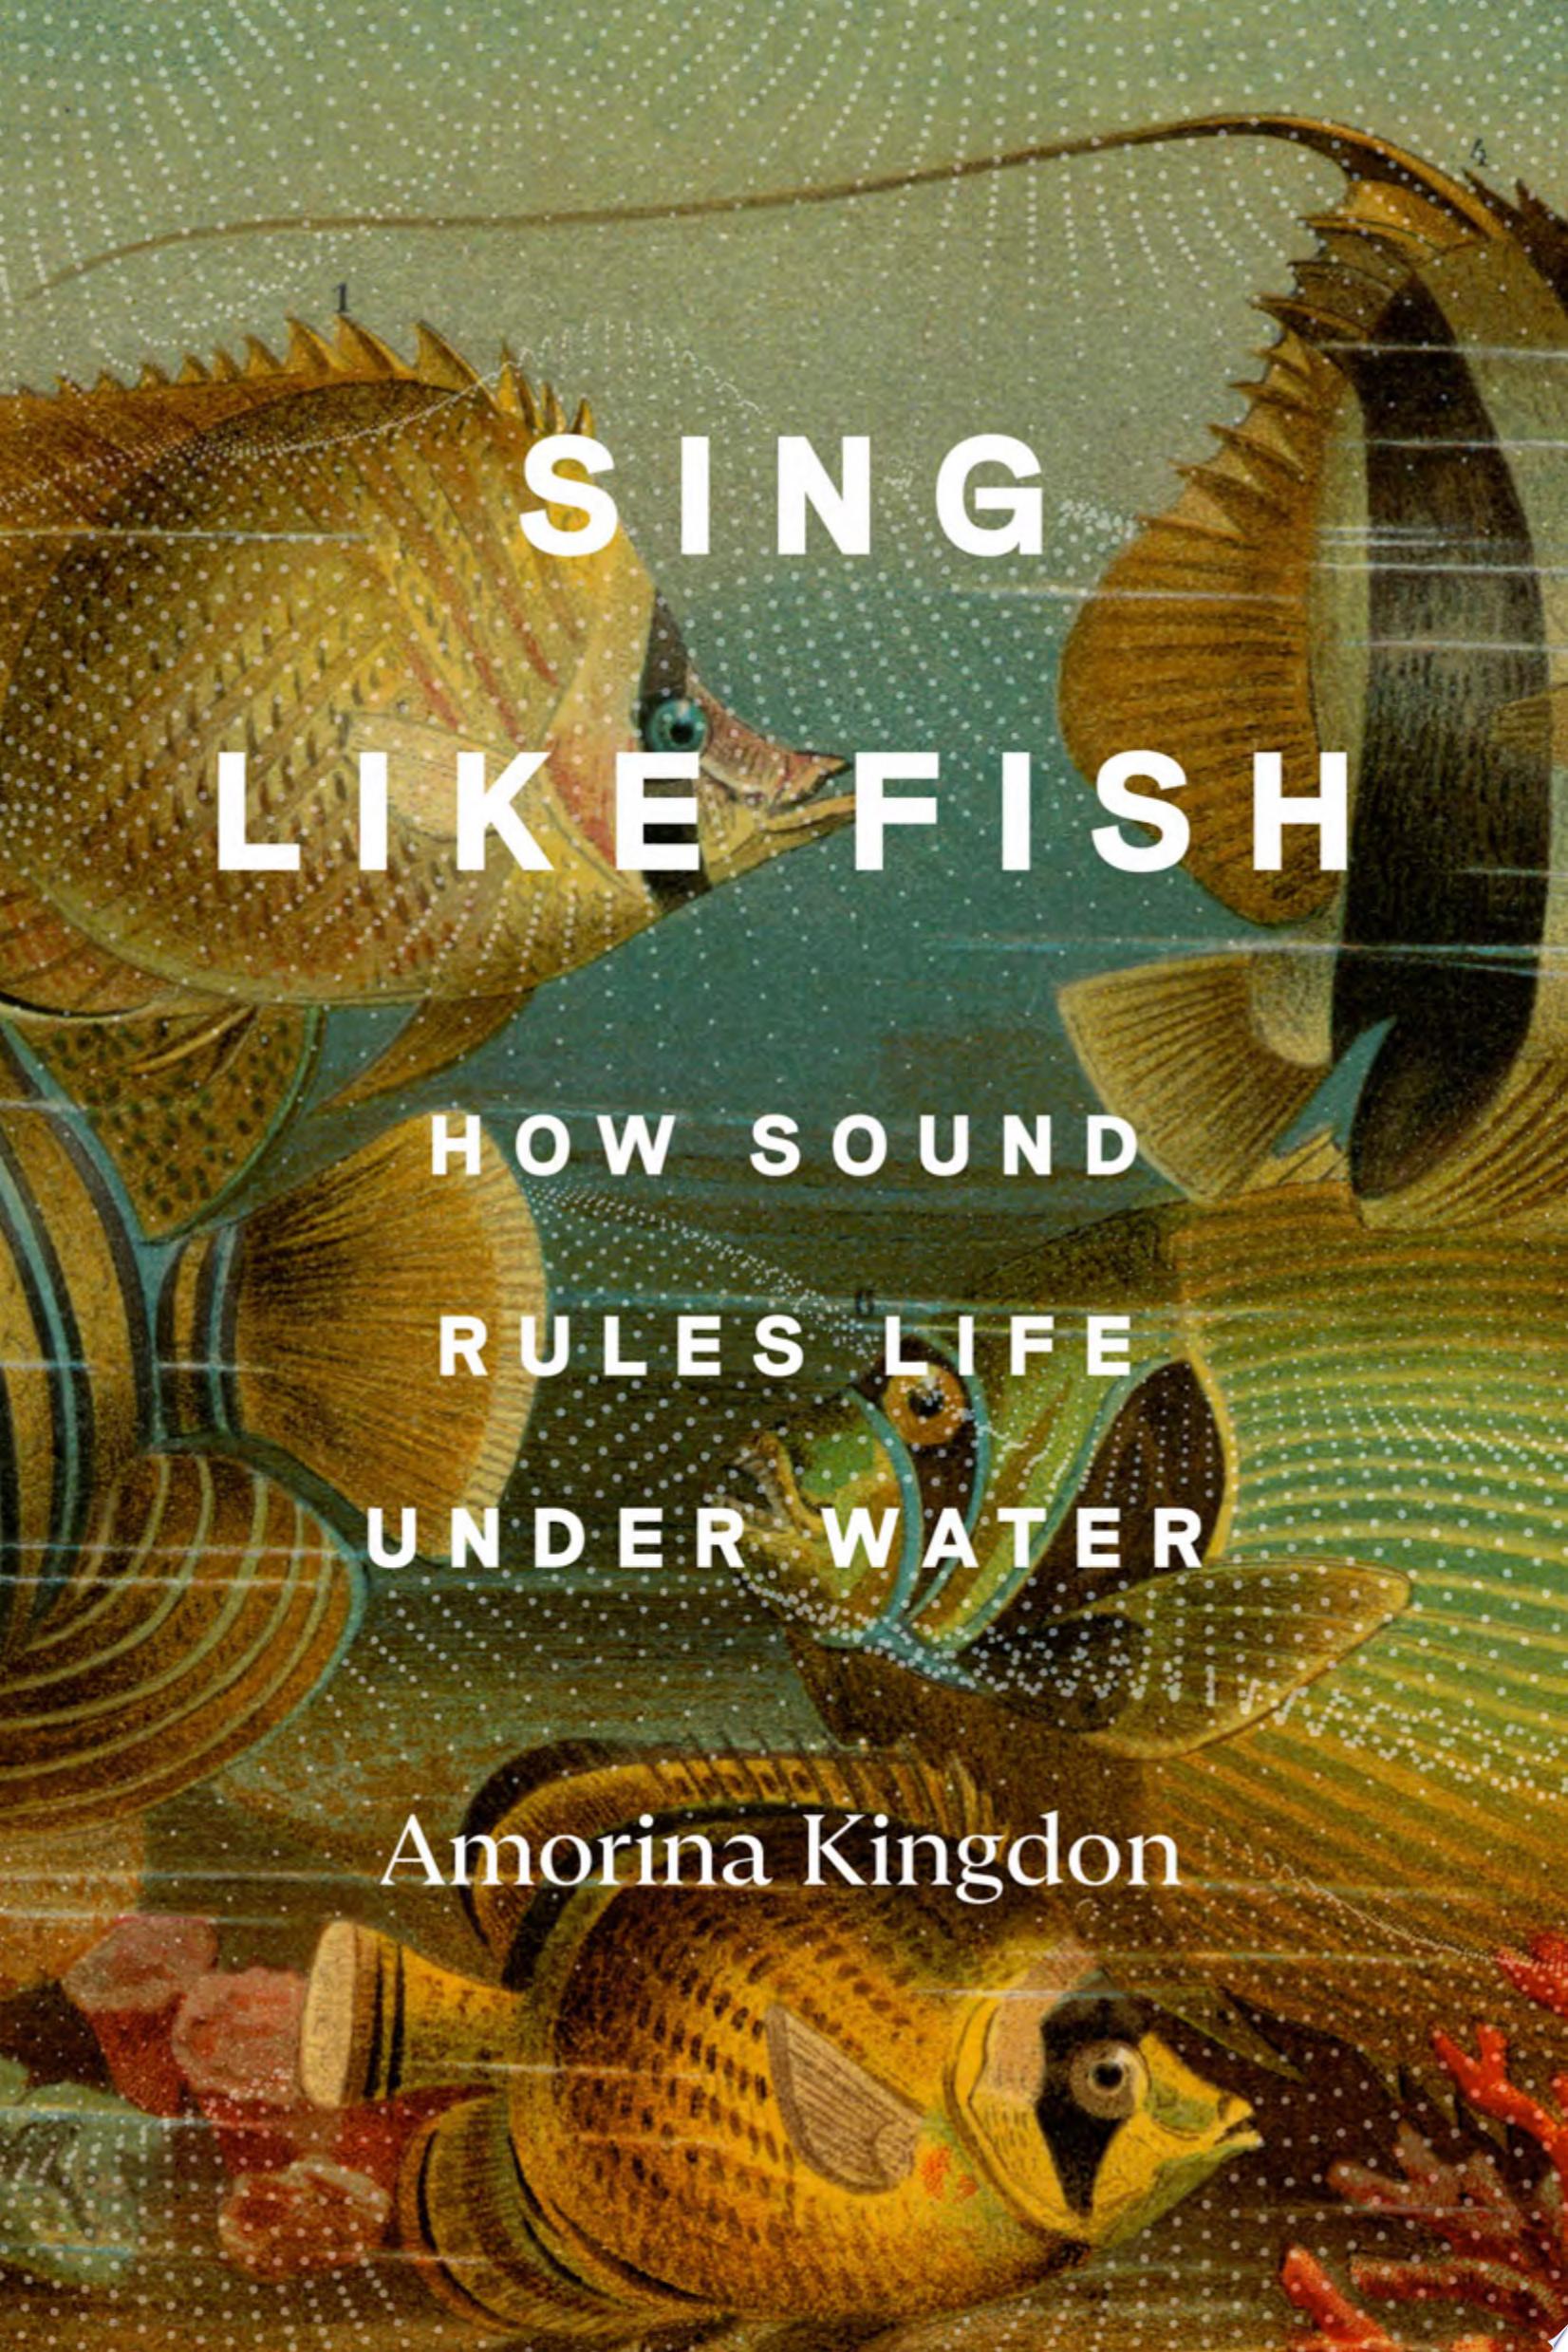 Image for "Sing Like Fish"